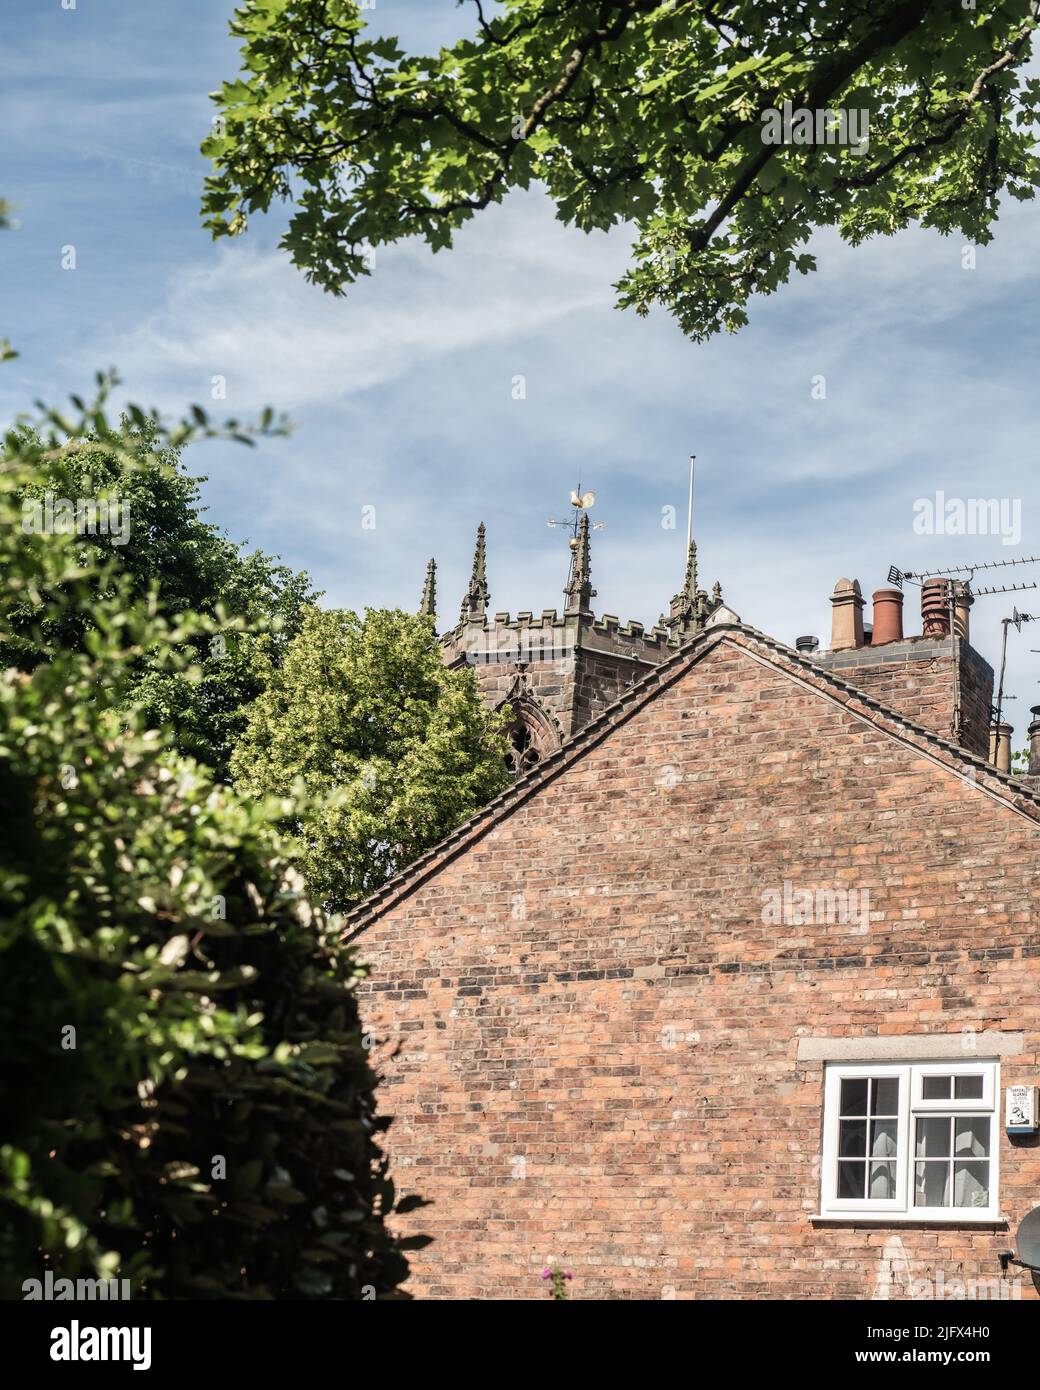 Nantwich Home and St Mary's Church Spire, Sunny Day, Town Center, Victorian Building, Architektur, Stock-Fotografie, Hes. Stockfoto